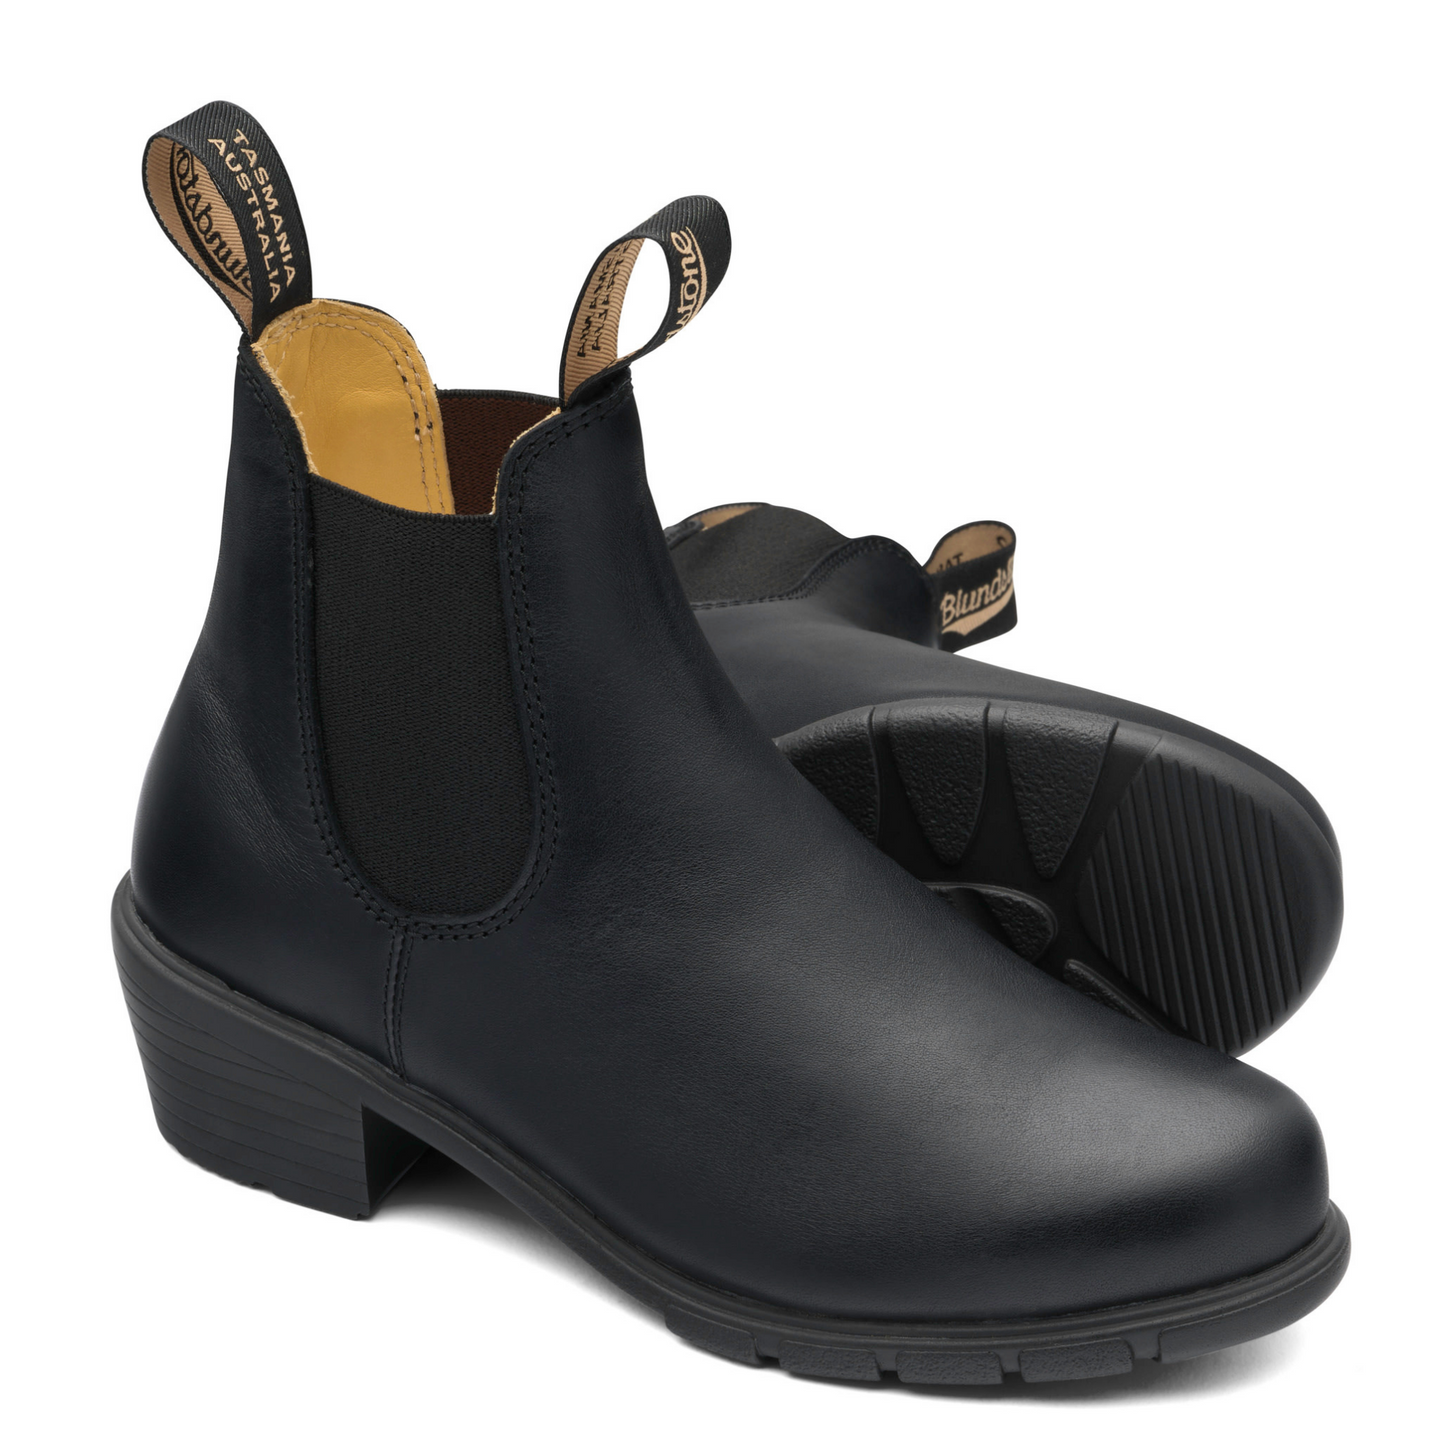 A pair of feminine, black leather, heeled boots with tanned colour interior lining.